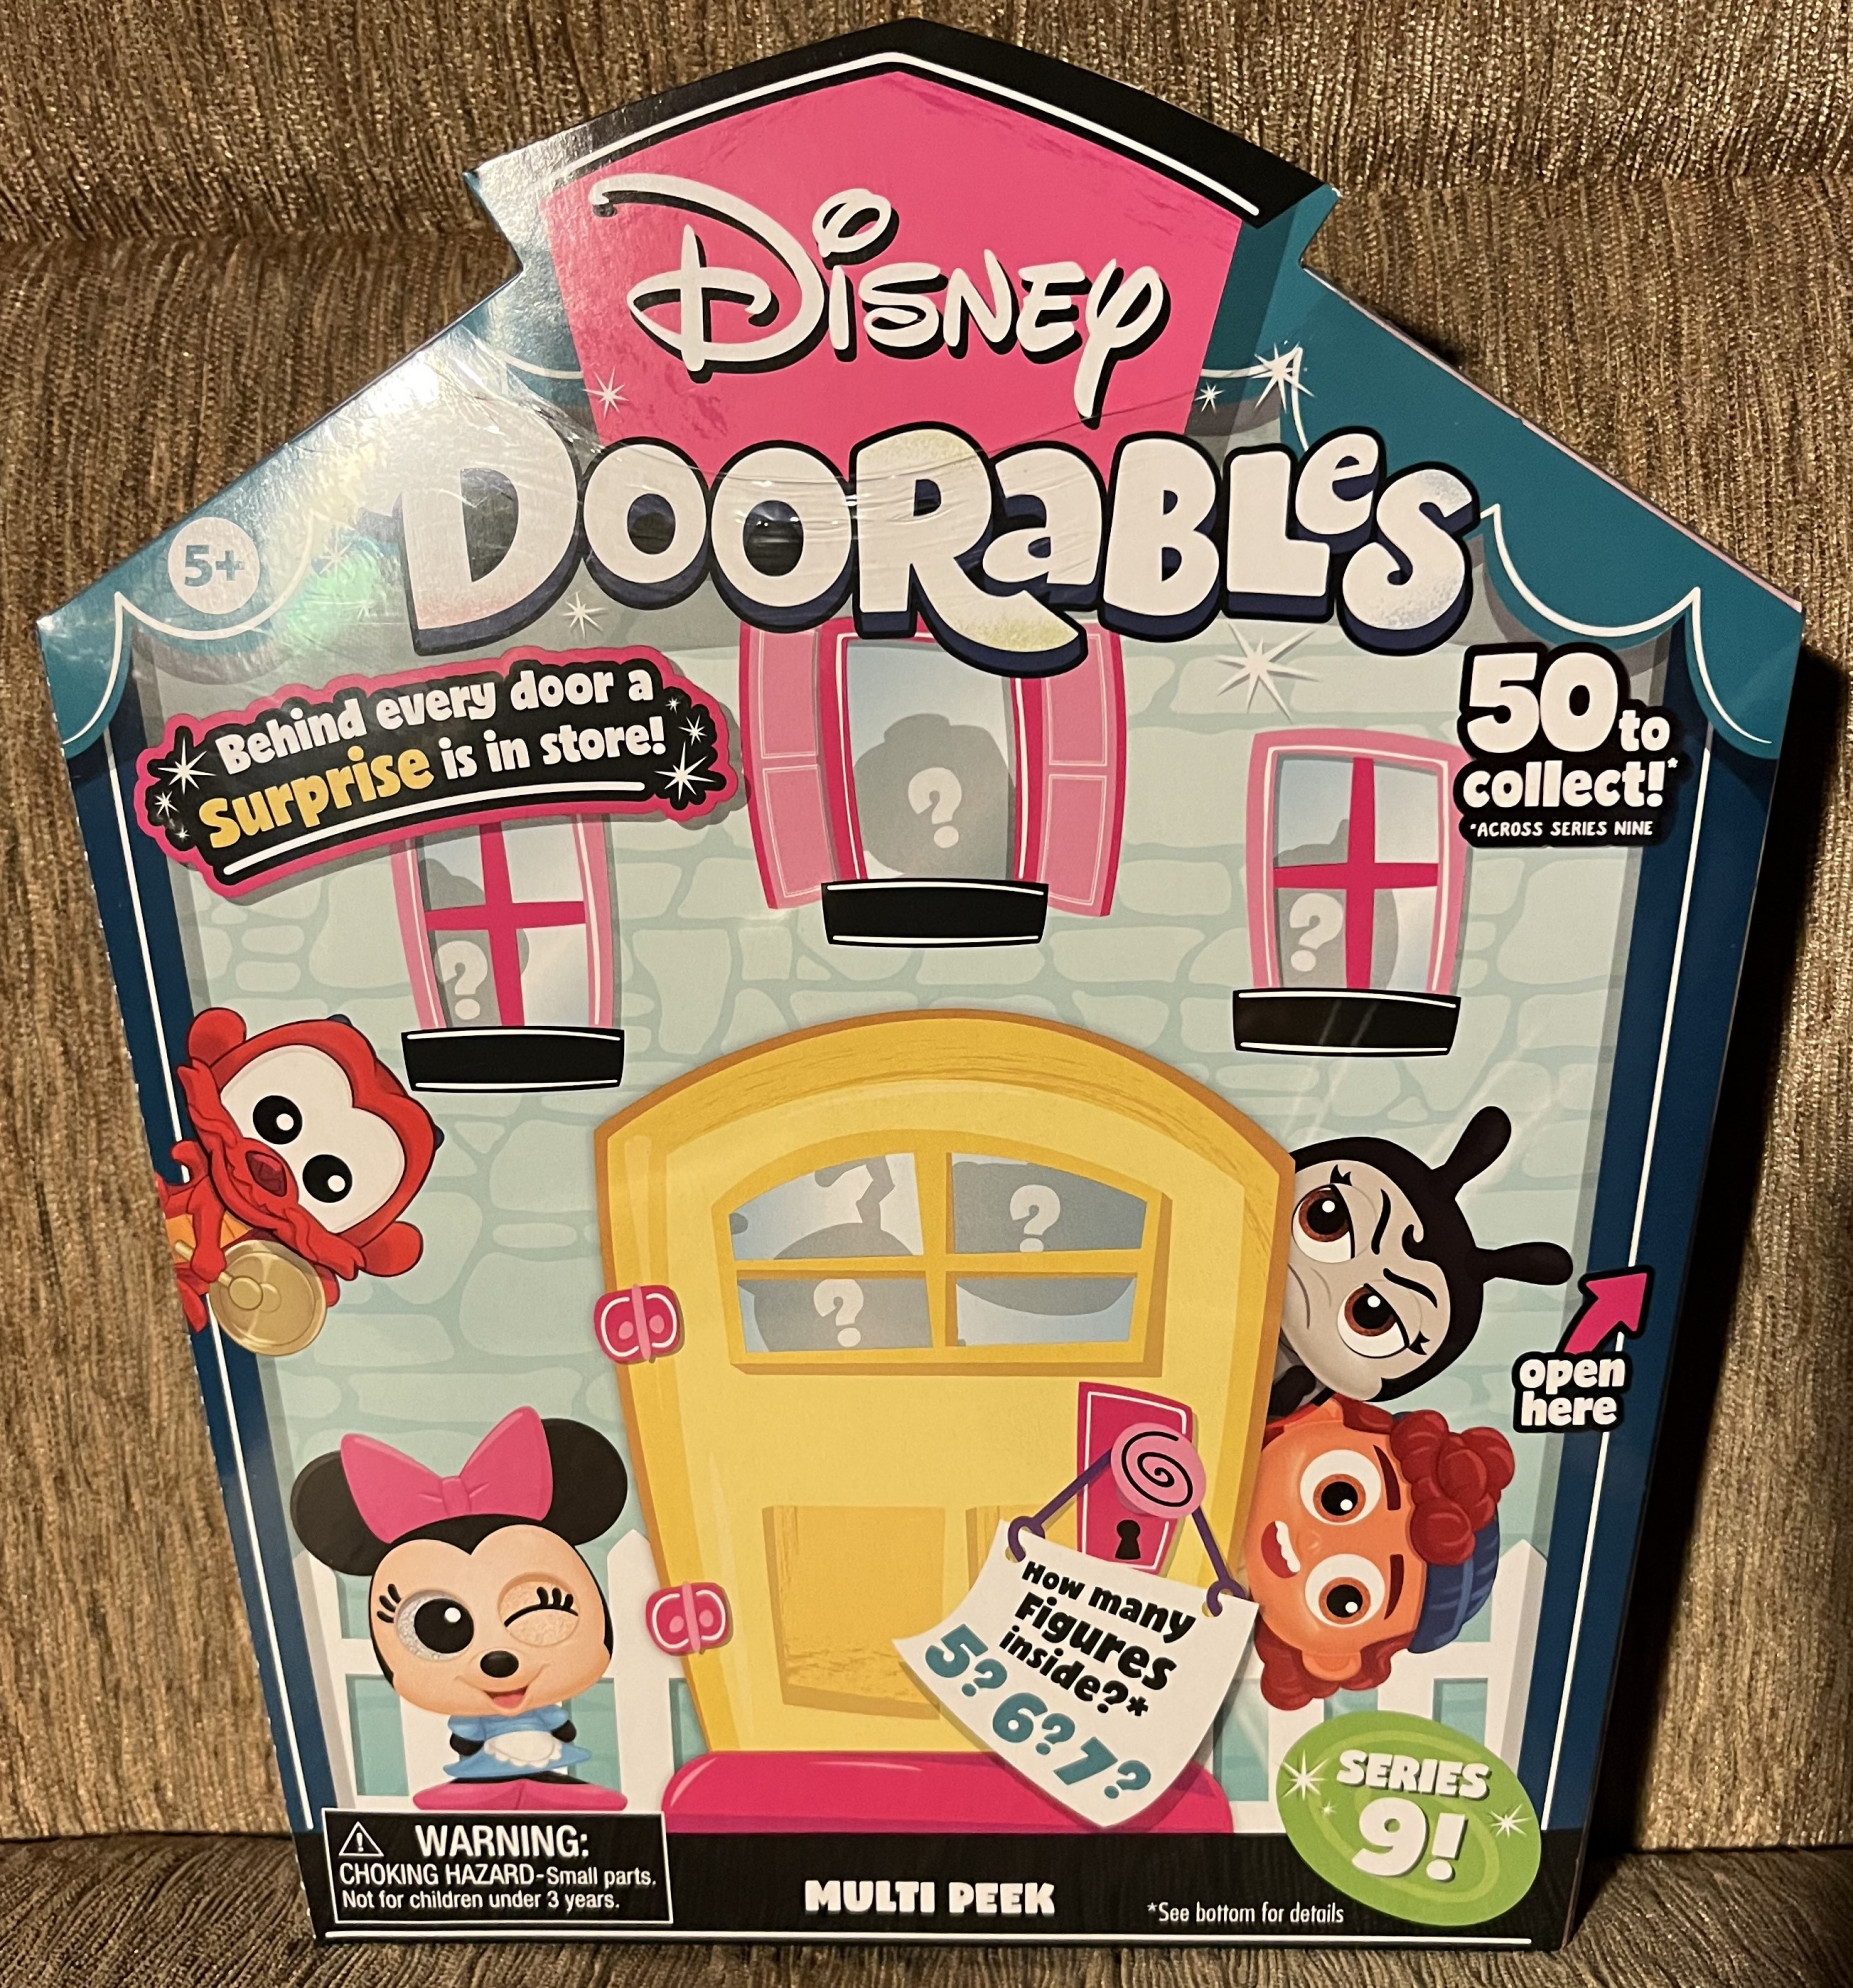 SO ADORABLE!! We are Hooked! Disney Doorables! 